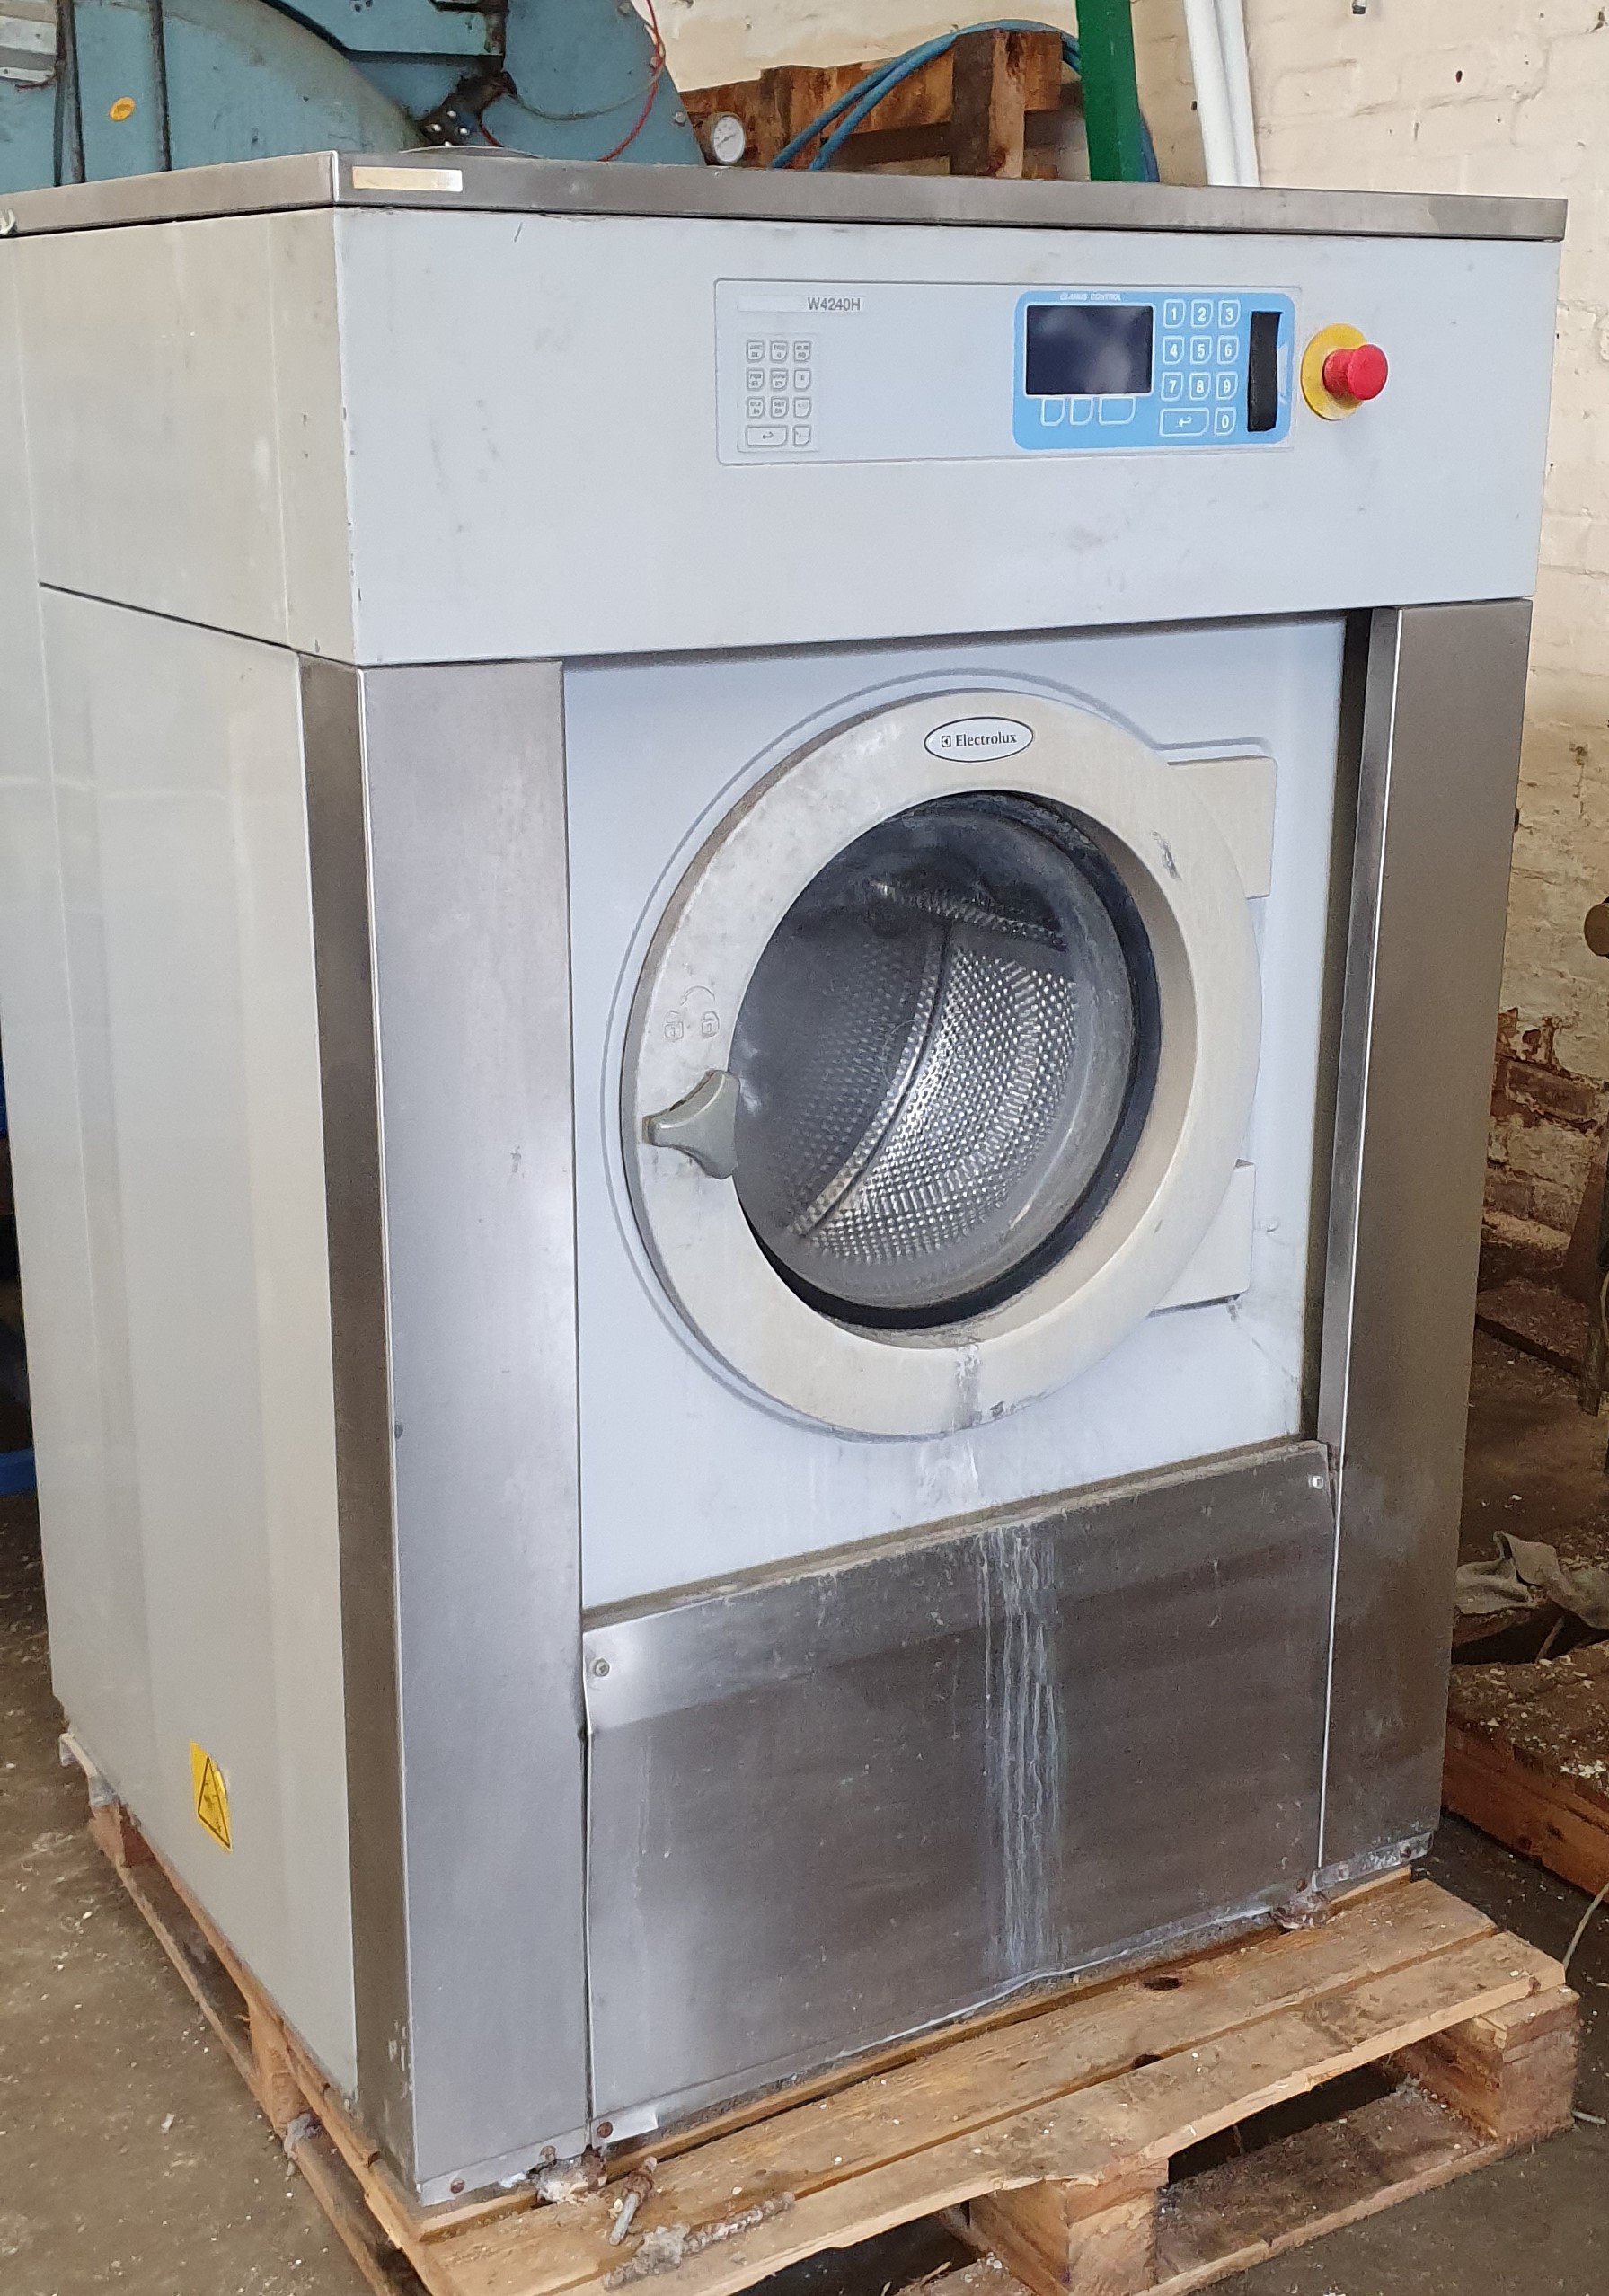 coal mushroom Terrible Two Electrolux Model W4240H, 27kgs washer extractors - LaundryQuip